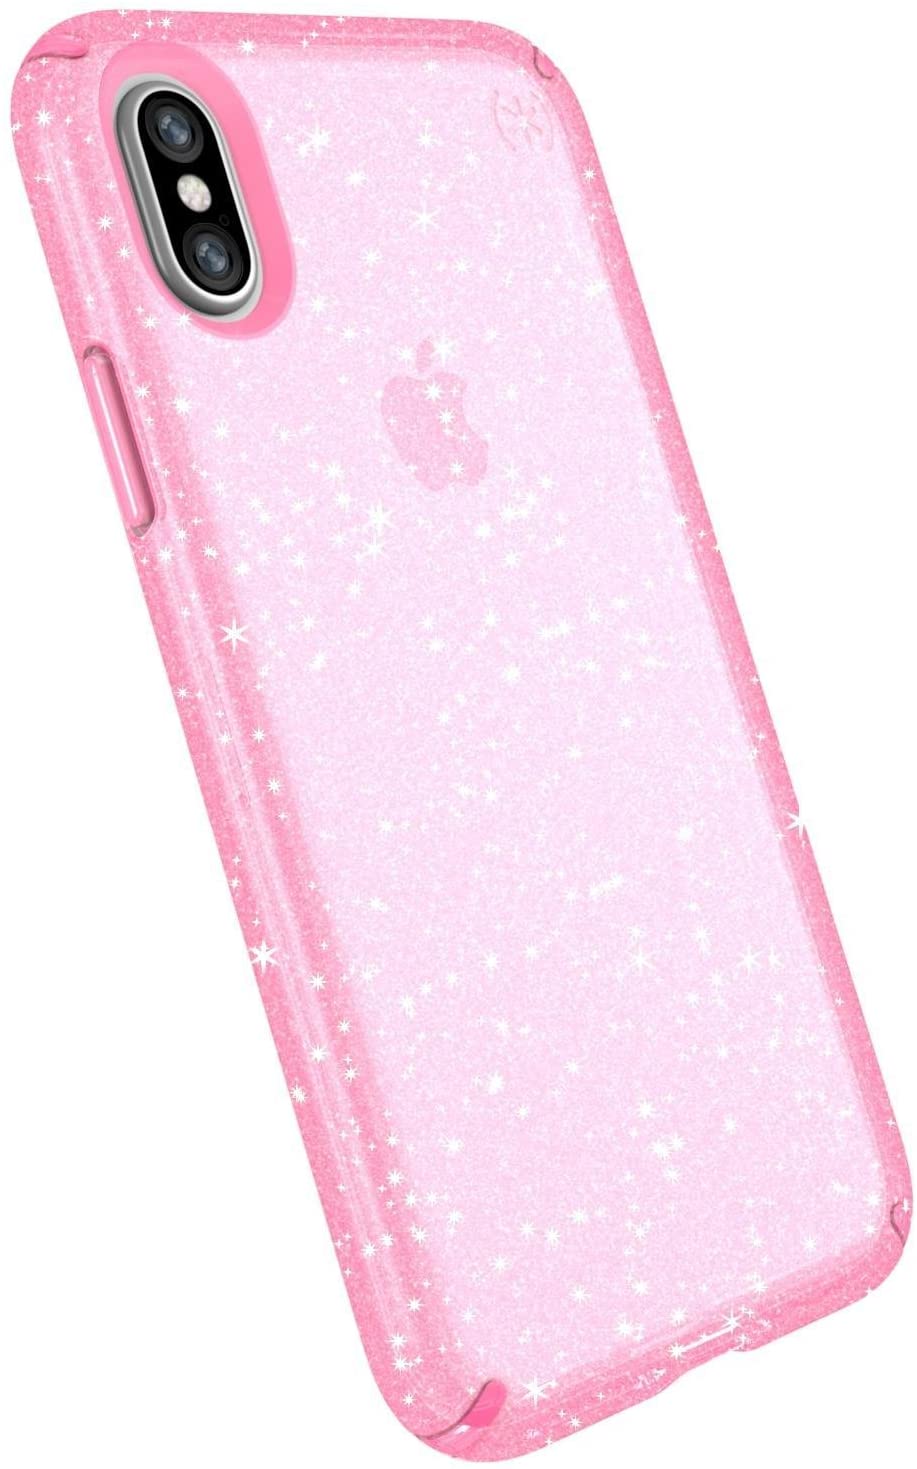 Speck Case for iPhone Xs/X - Bella Pink with Gold Glitter/Bella Pink Wireless Verrosa Retail Inc 